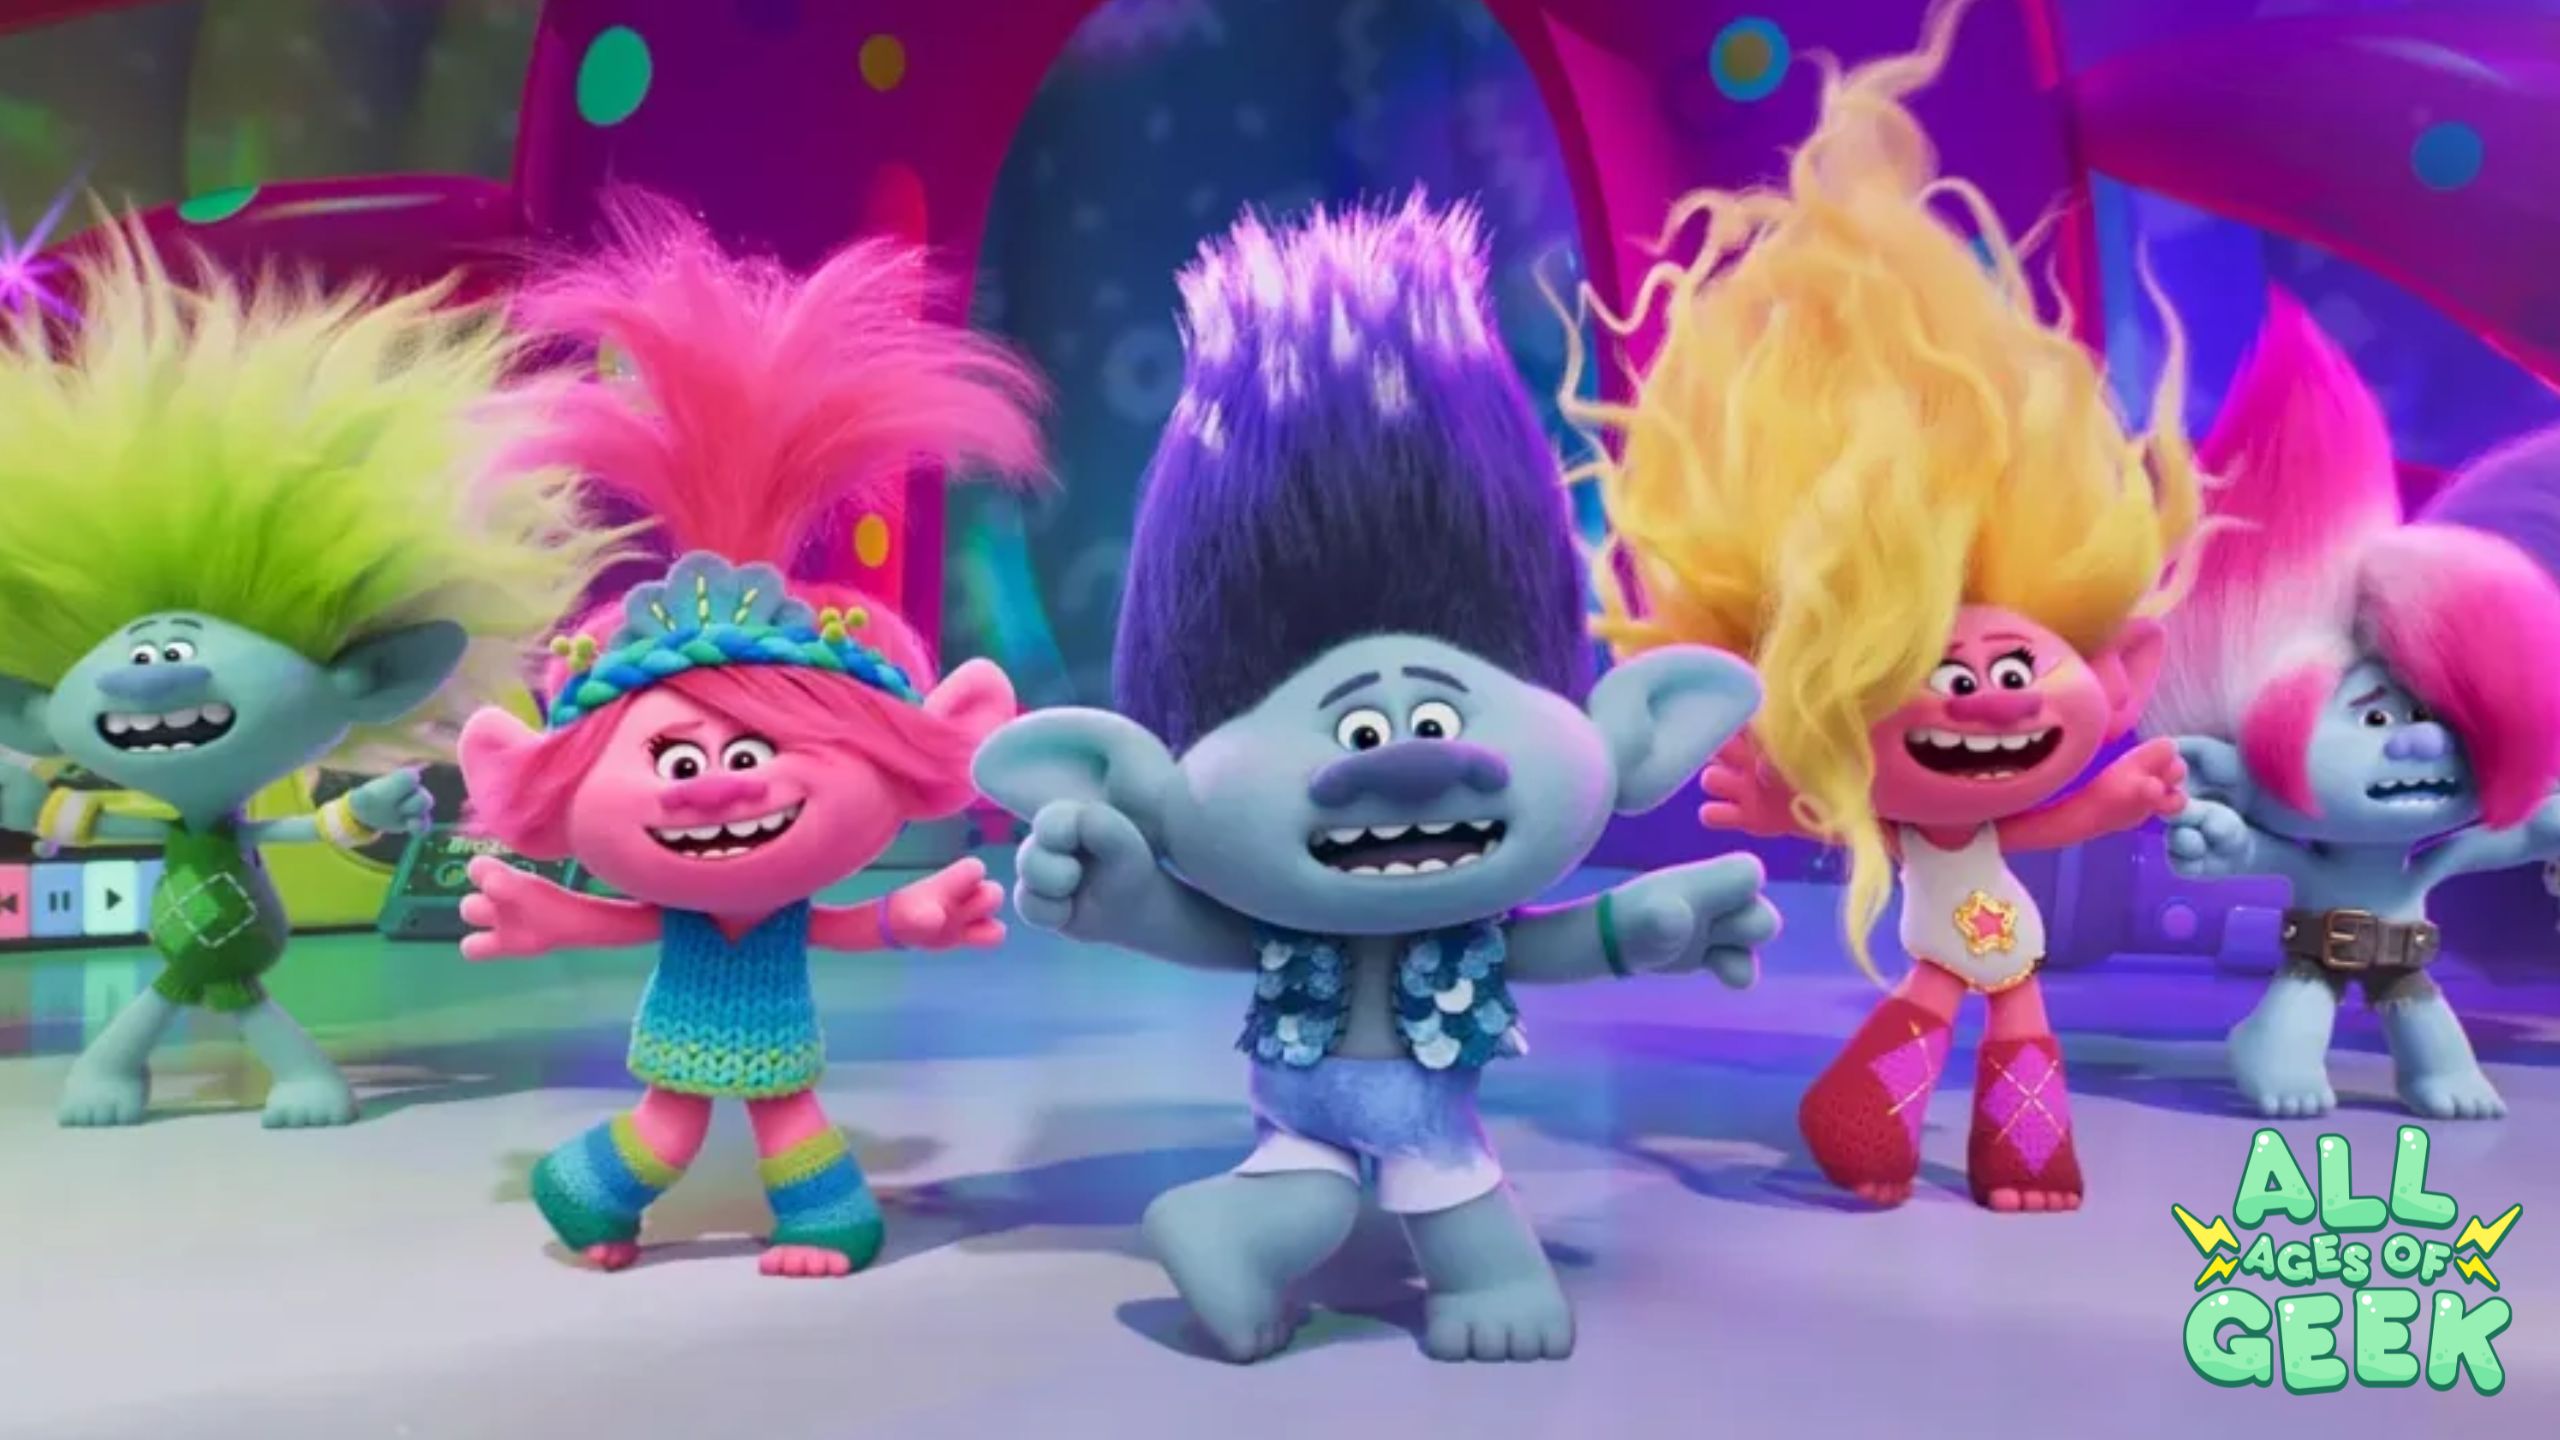 Which Trolls Band Together Character Are You? Take the Quiz to Find Out!